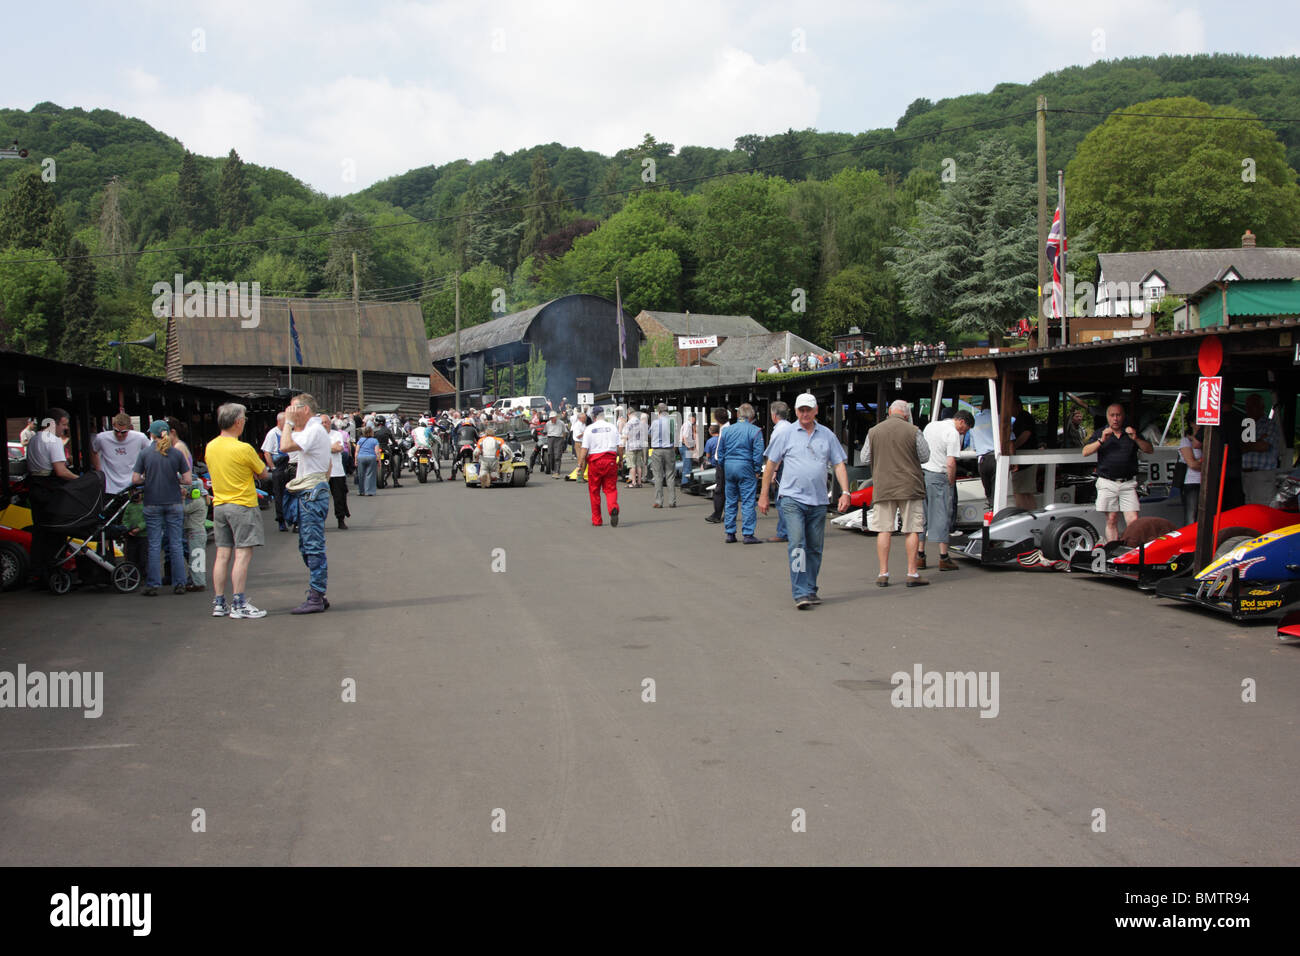 Le paddock à Shelsley Walsh Hill Climb, Worcestershire, Angleterre. Banque D'Images